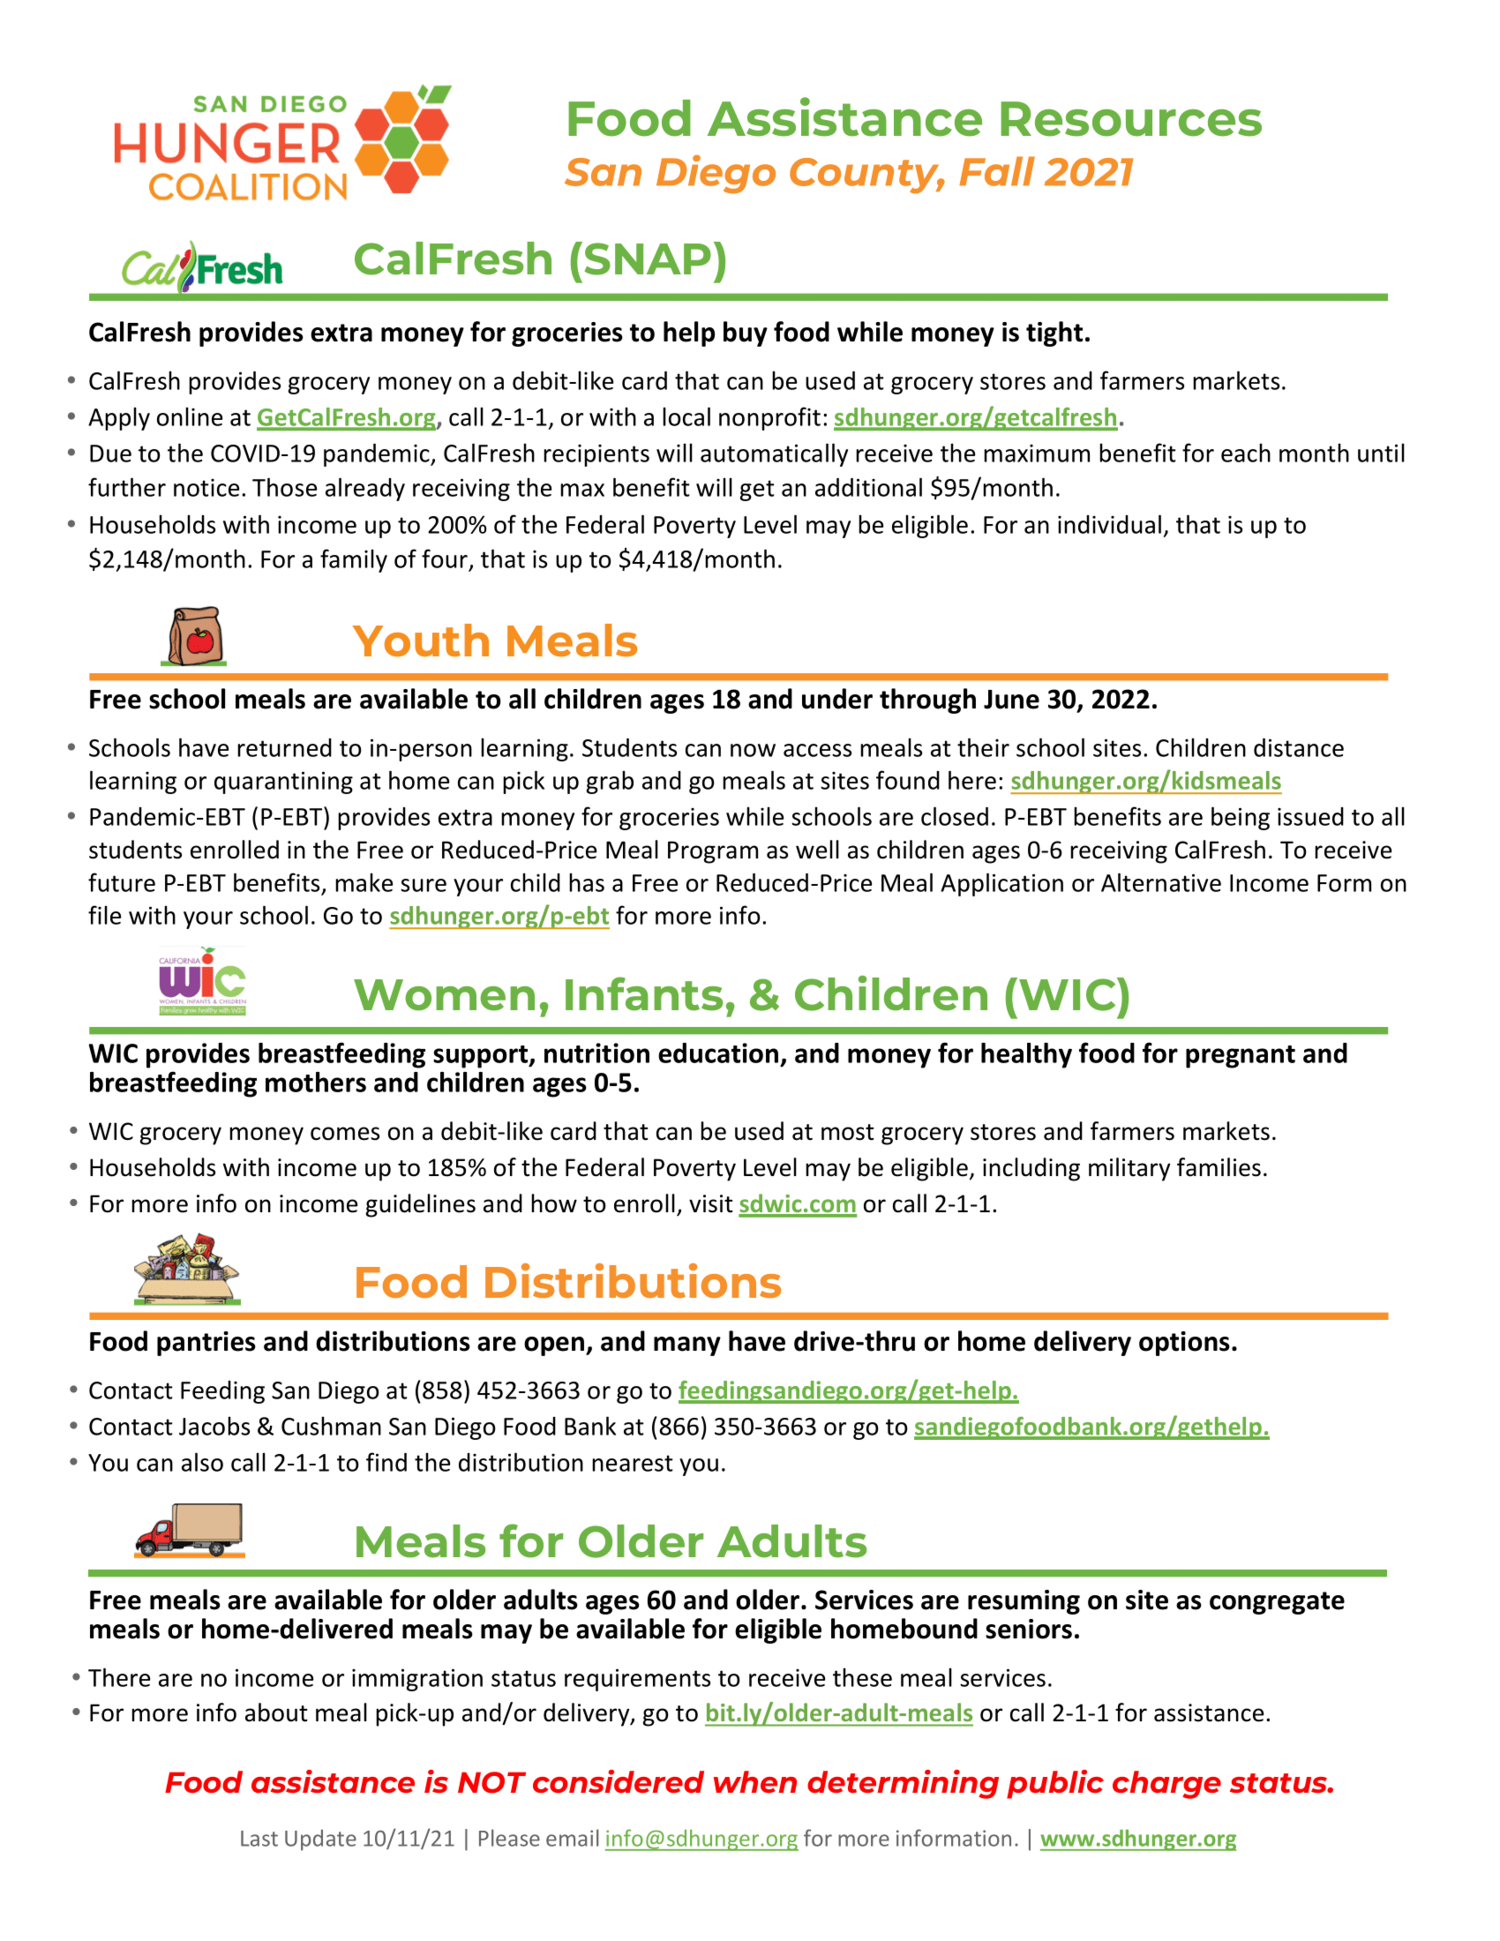 Food Assistance Resource Flyers — San Diego Hunger Coalition